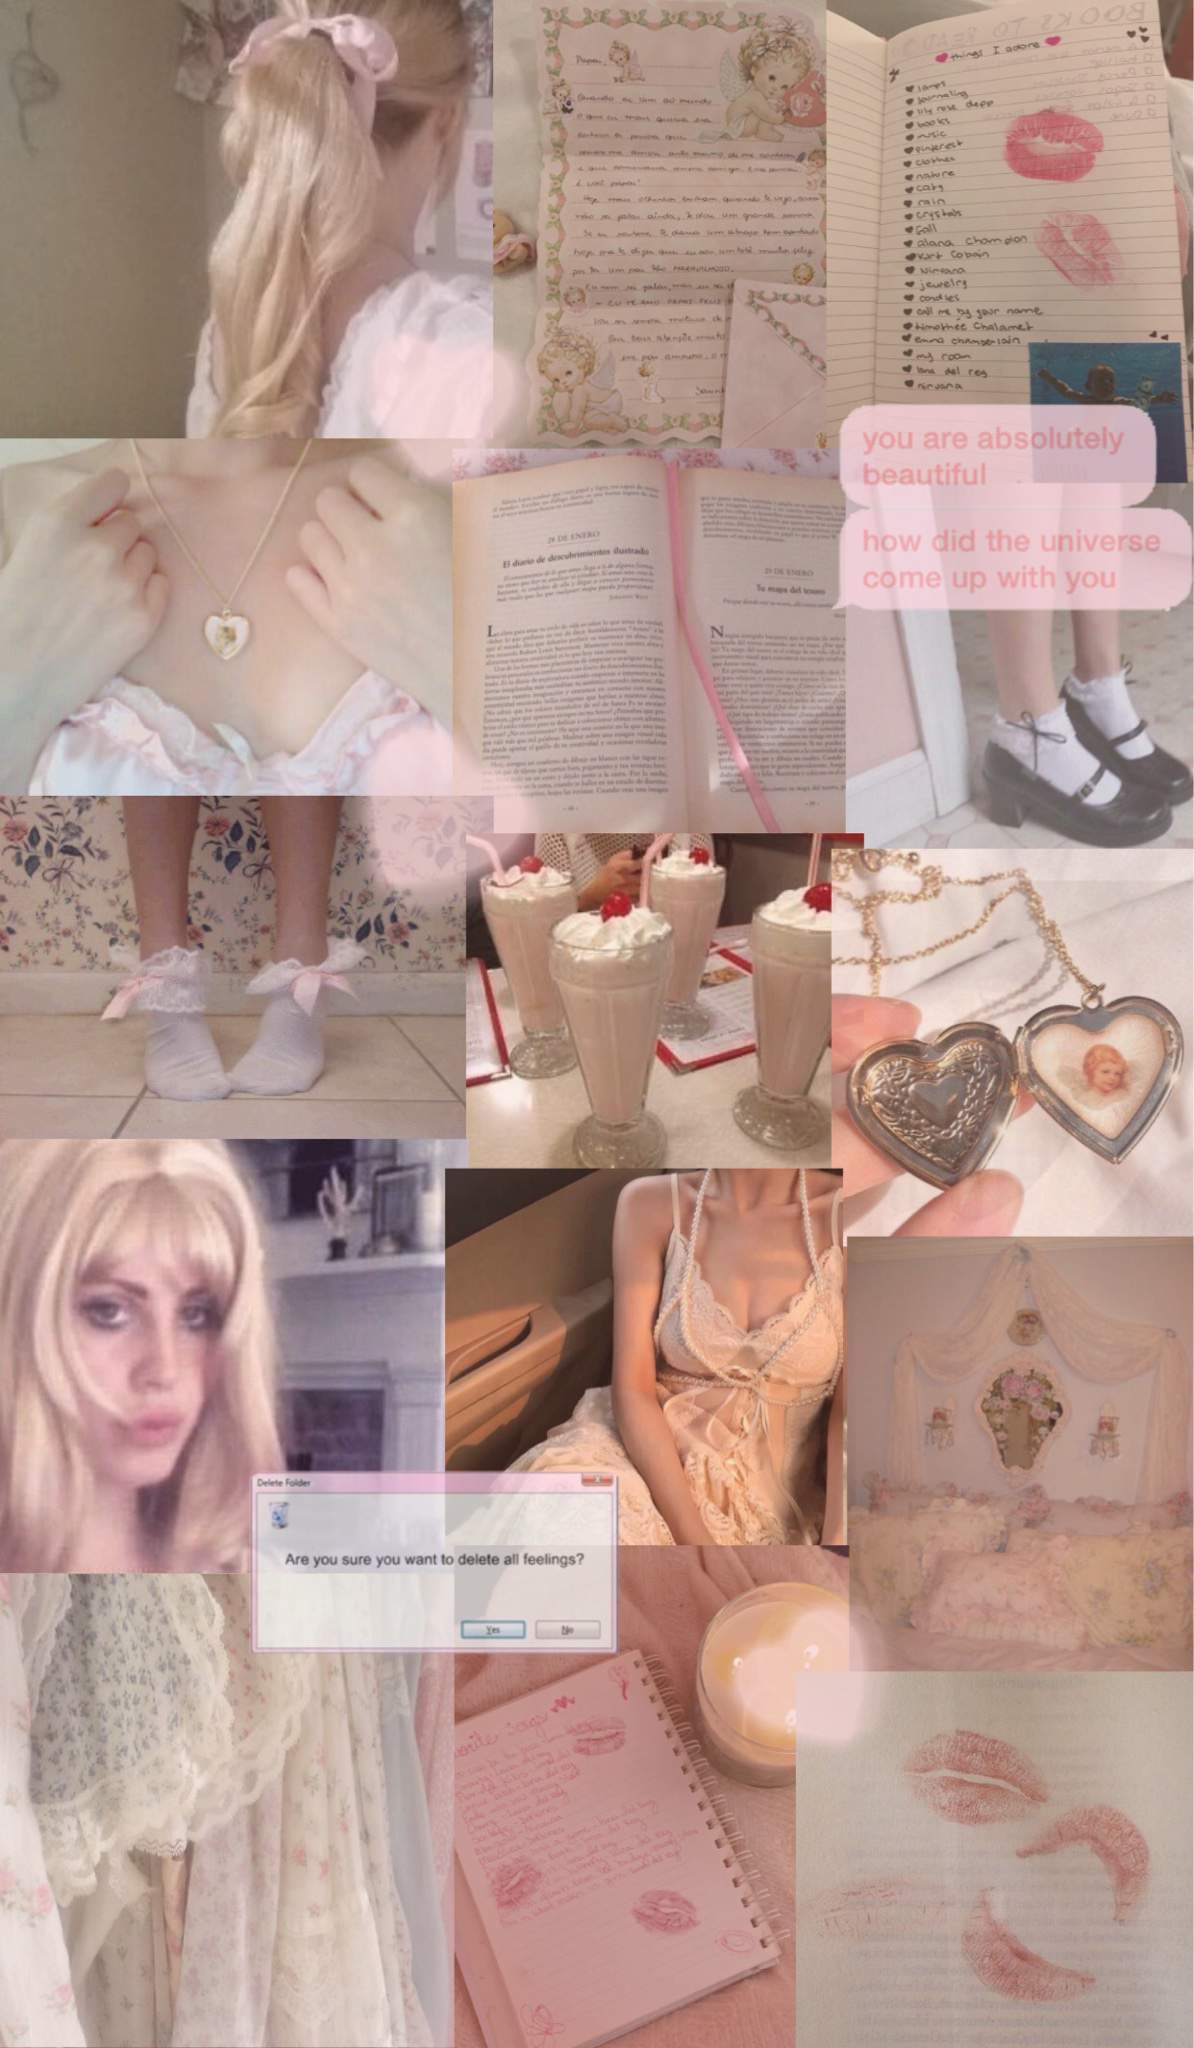 Aesthetic background with pink and white images of books, a doll, a notebook, a candle, a heart, and a girl with pink hair - Coquette